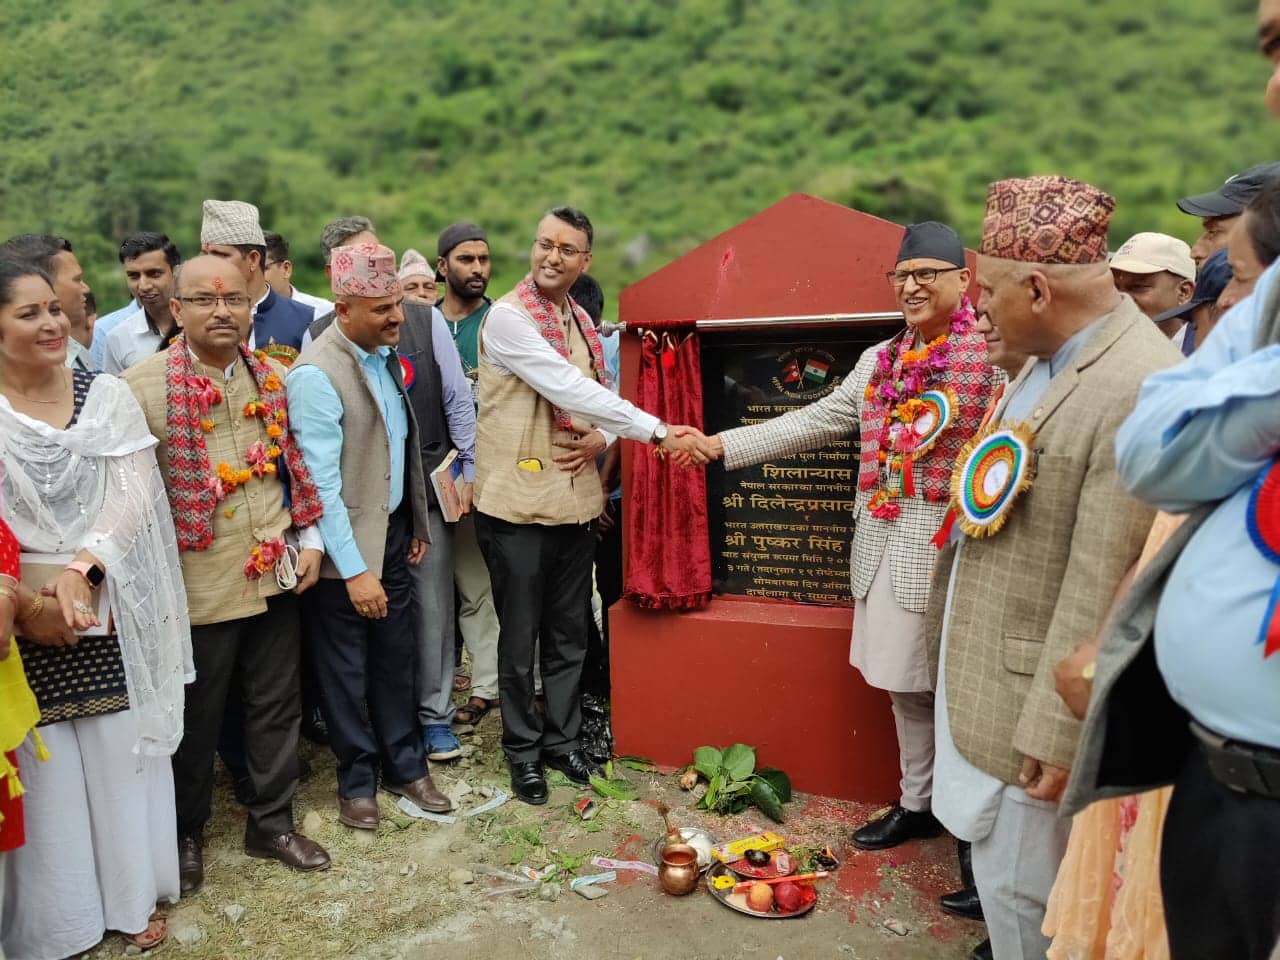 Motorable Bridge to be constructed over Mahakali River connecting Nepal and India